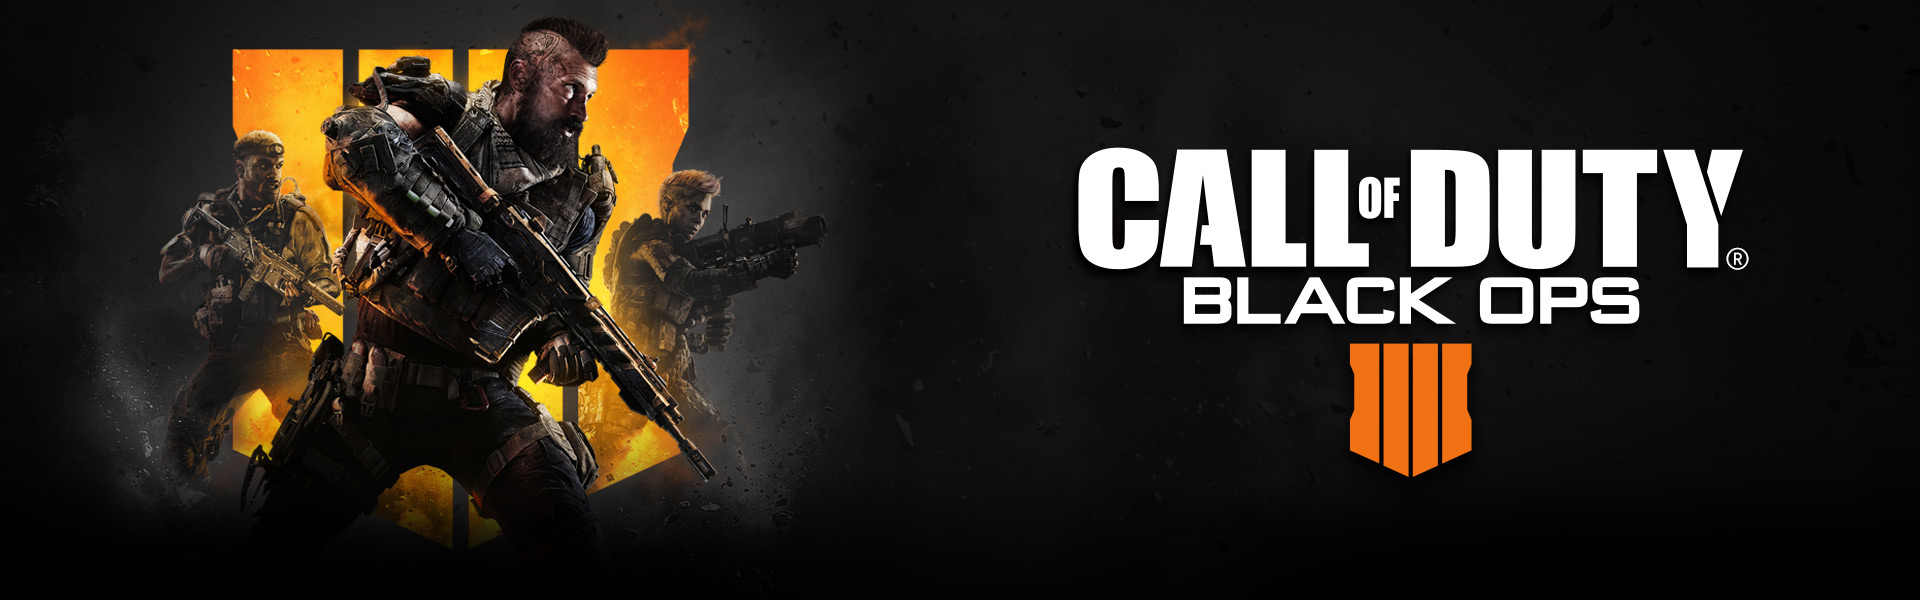 call of duty black ops 4 xbox one store